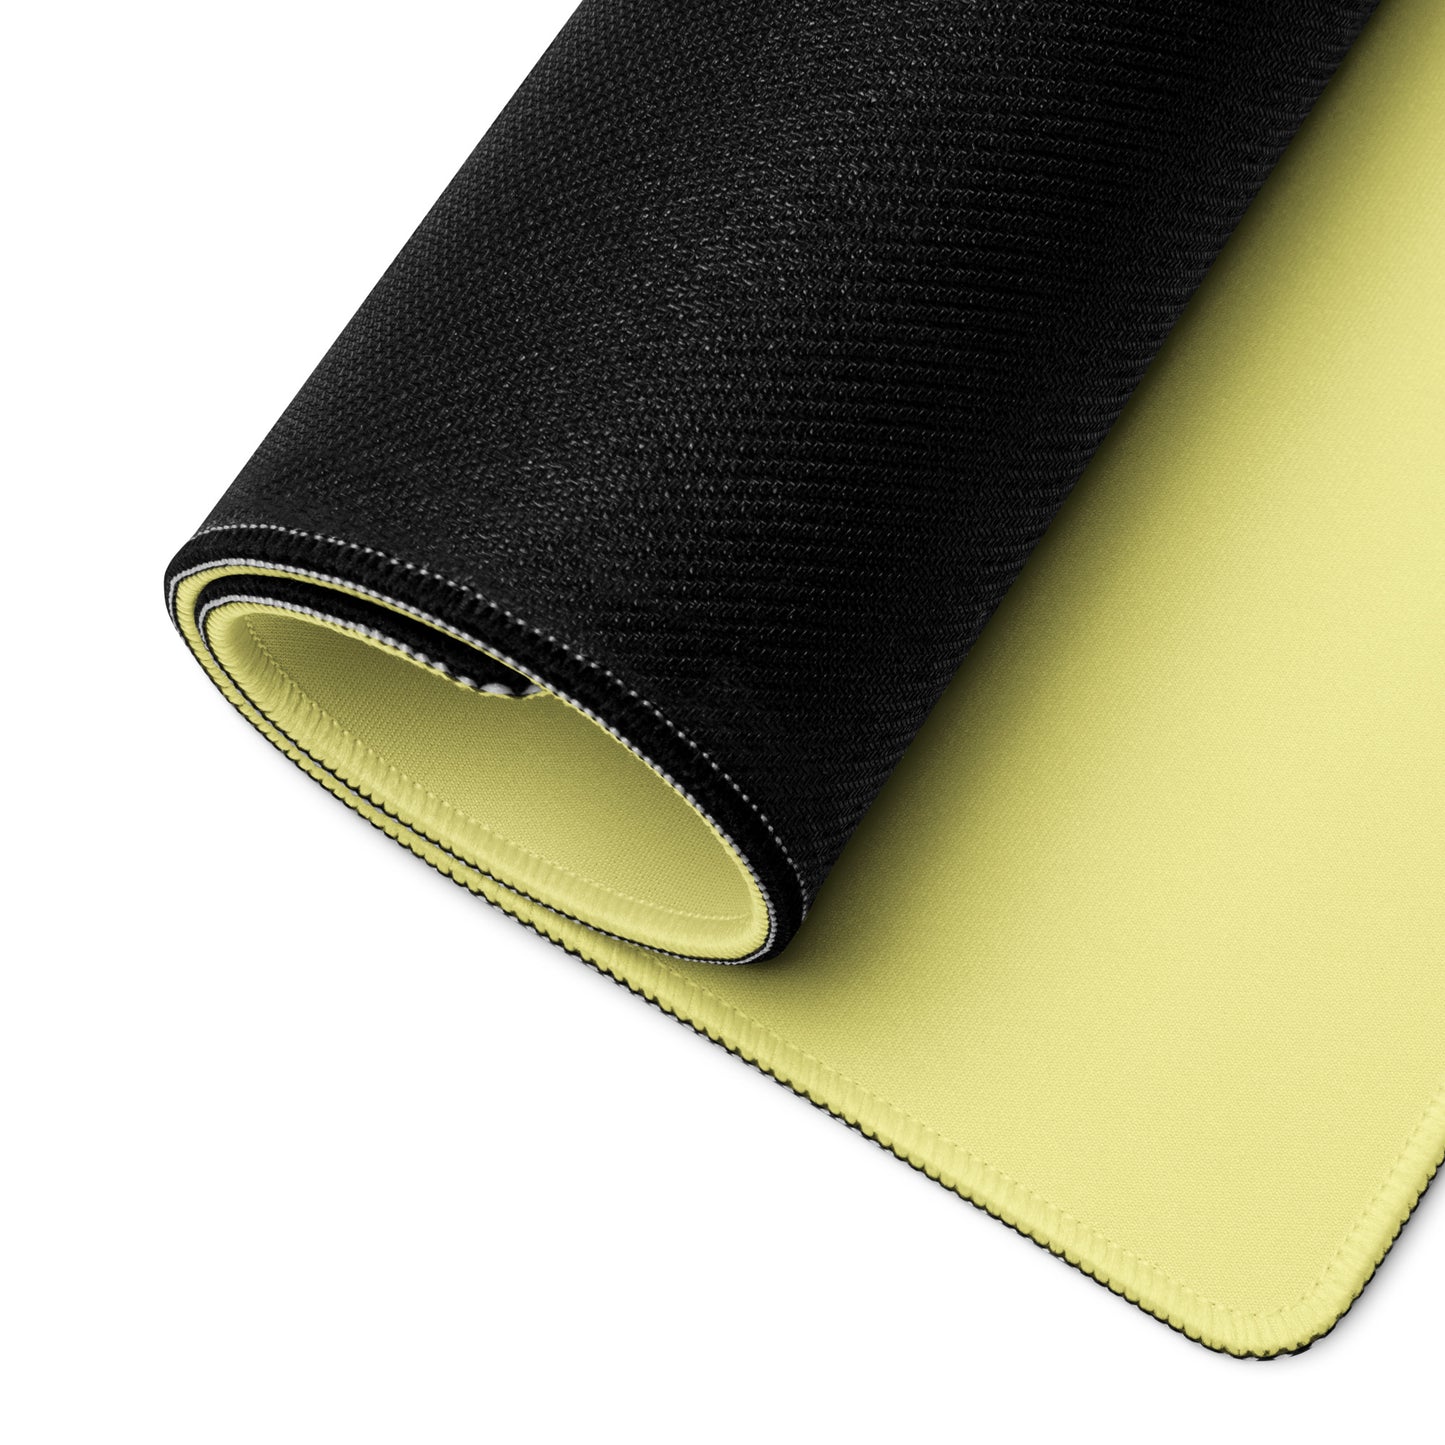 A yellow gaming desk pad rolled up.